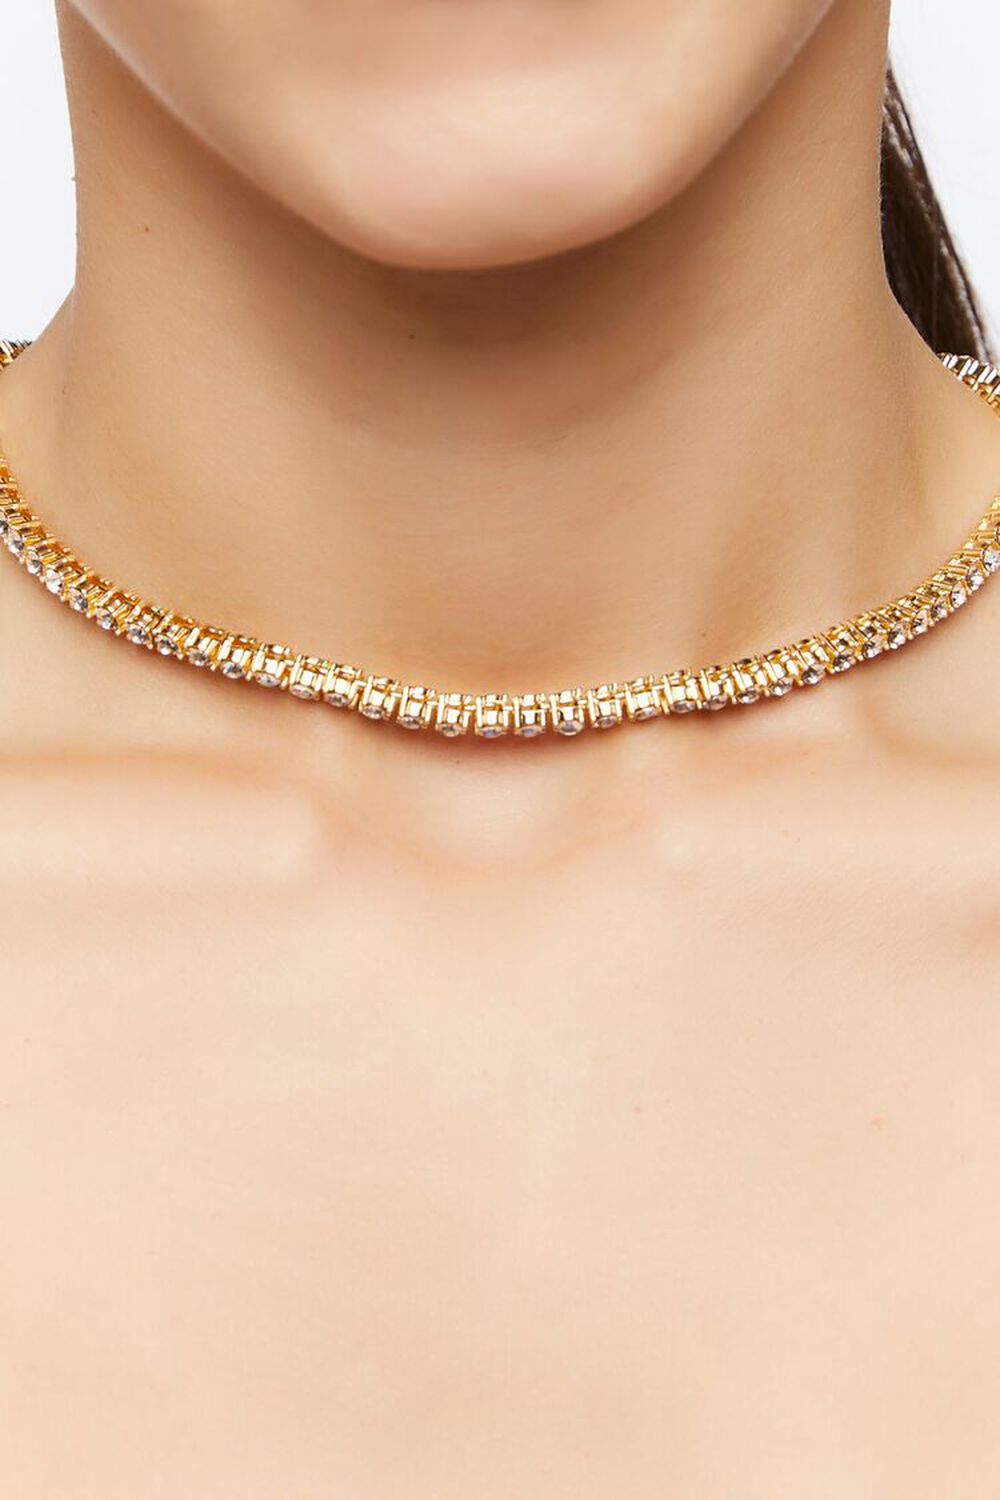 GOLD/CLEAR Faux Gem Box Chain Necklace, image 1